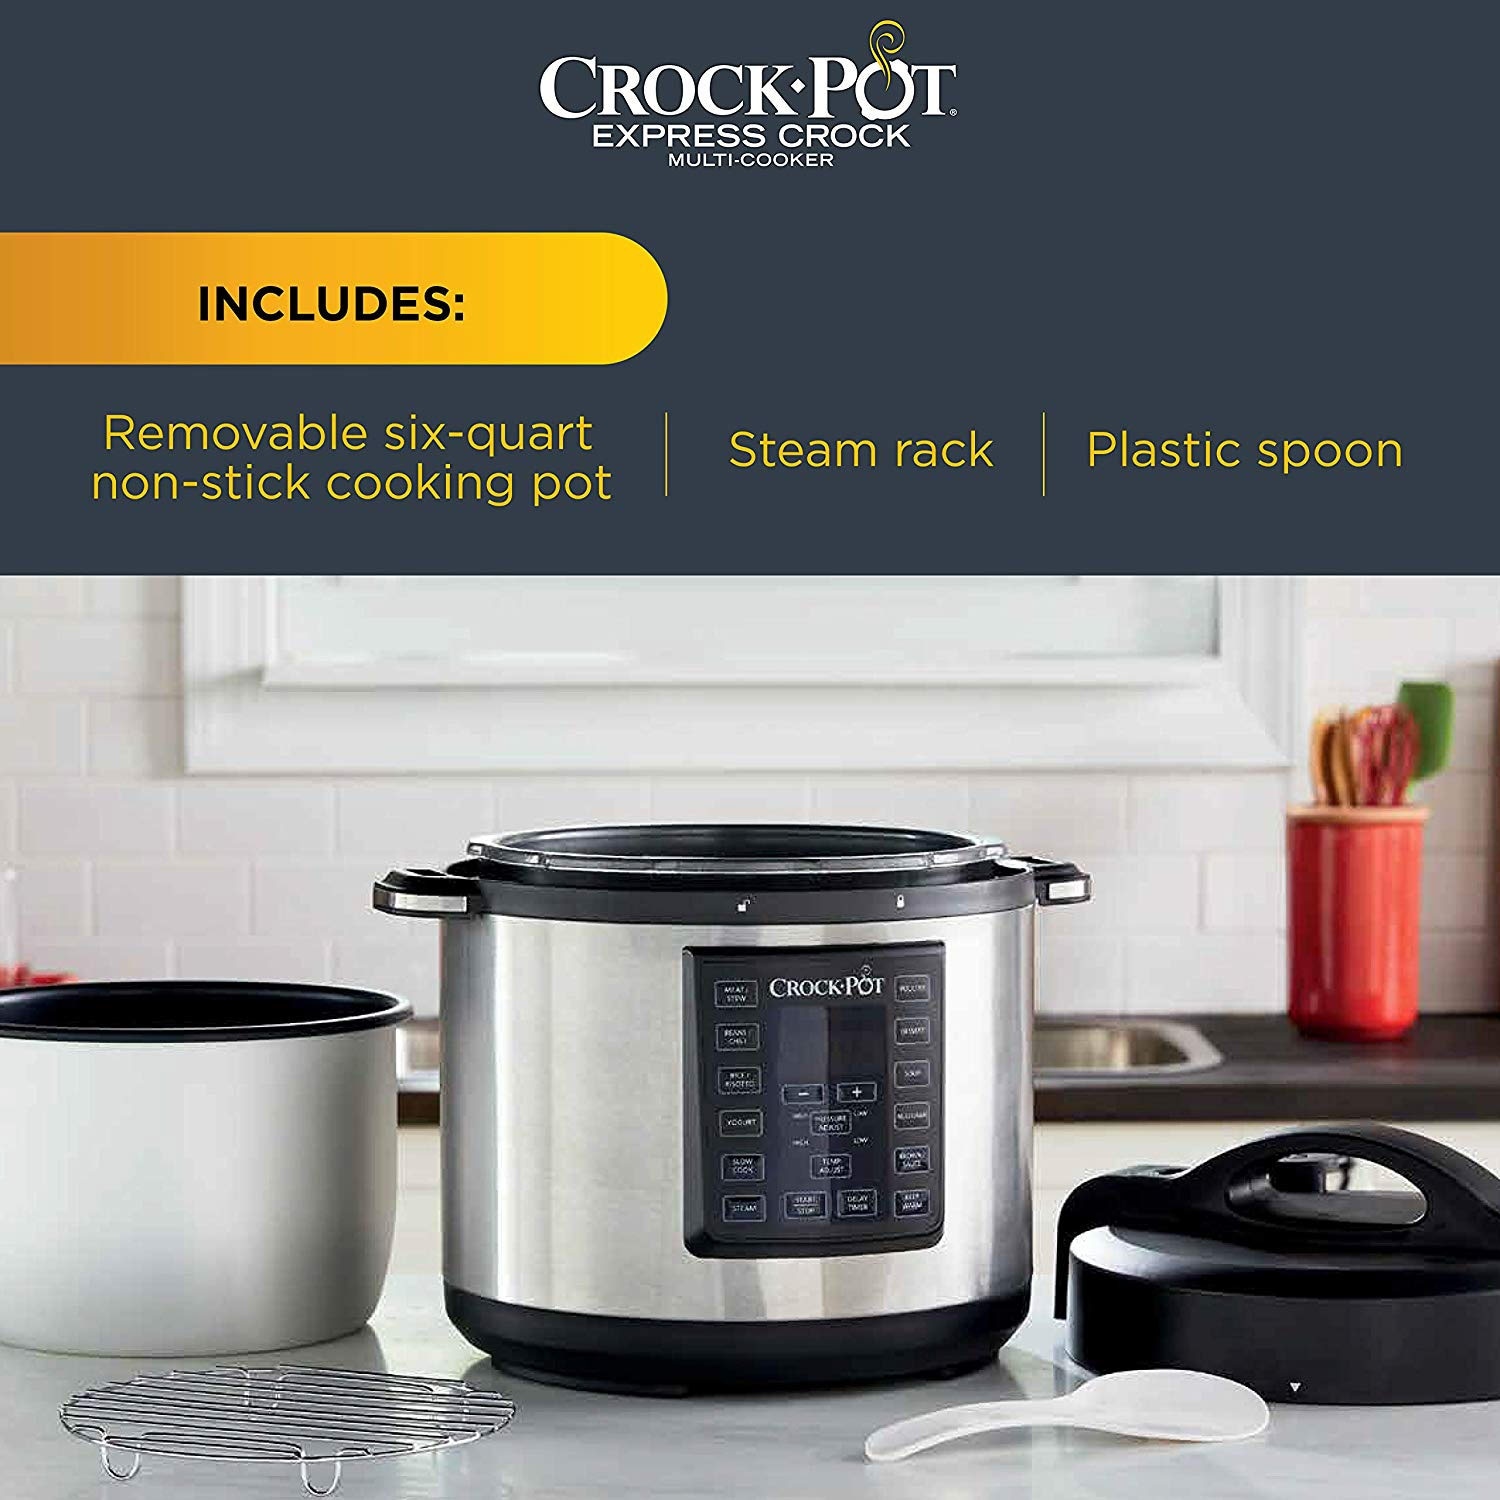 https://ak1.ostkcdn.com/images/products/is/images/direct/17e3d03e22a1edf1d5f8dc98c7ed0b2ab6064b35/Crock-Pot-8-In-1-Multi-Use-Express-Cooker%2C-Silver-Black%2C-6-Quarts.jpg